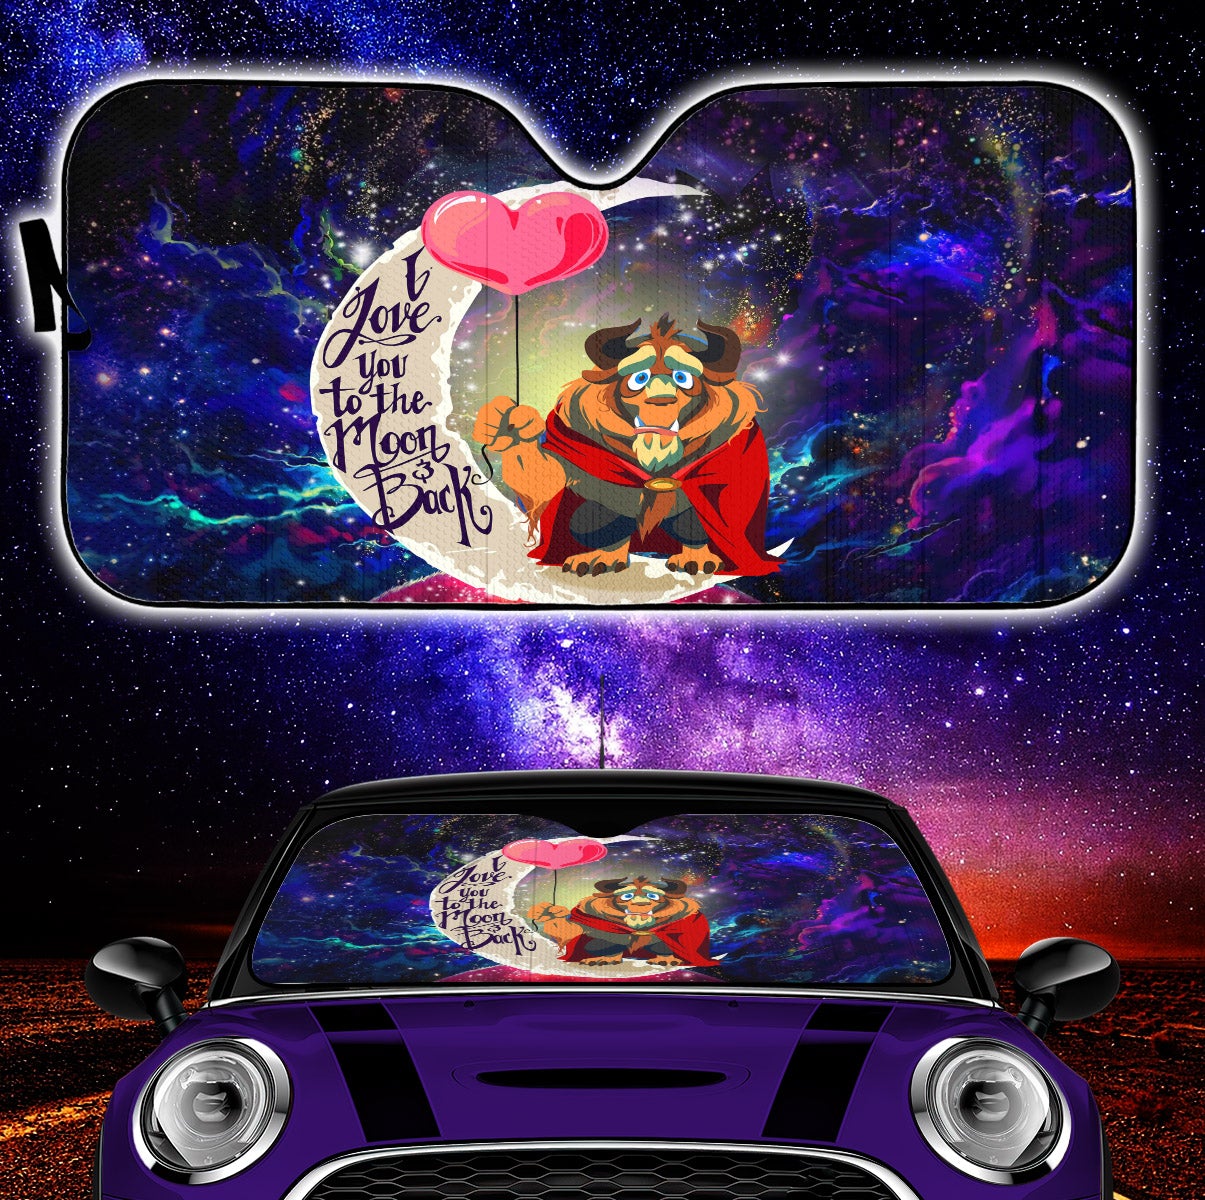 Beauty And The Beast Love You To The Moon Galaxy Car Auto Sunshades